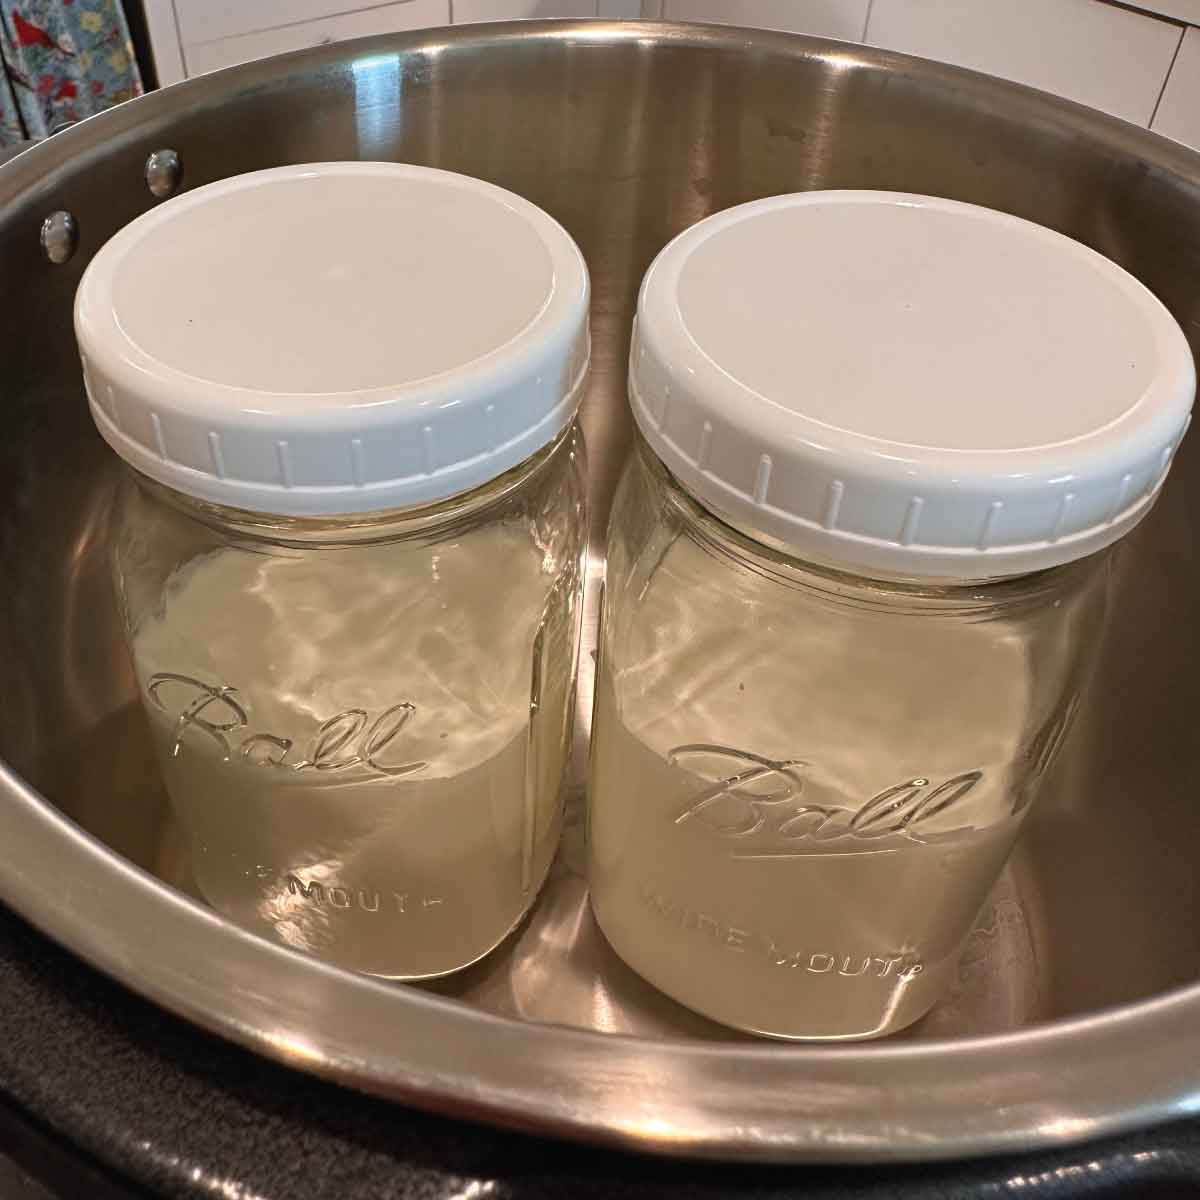 Super Cultured Dairy in two quart-sized jars in Instant Pot Pro